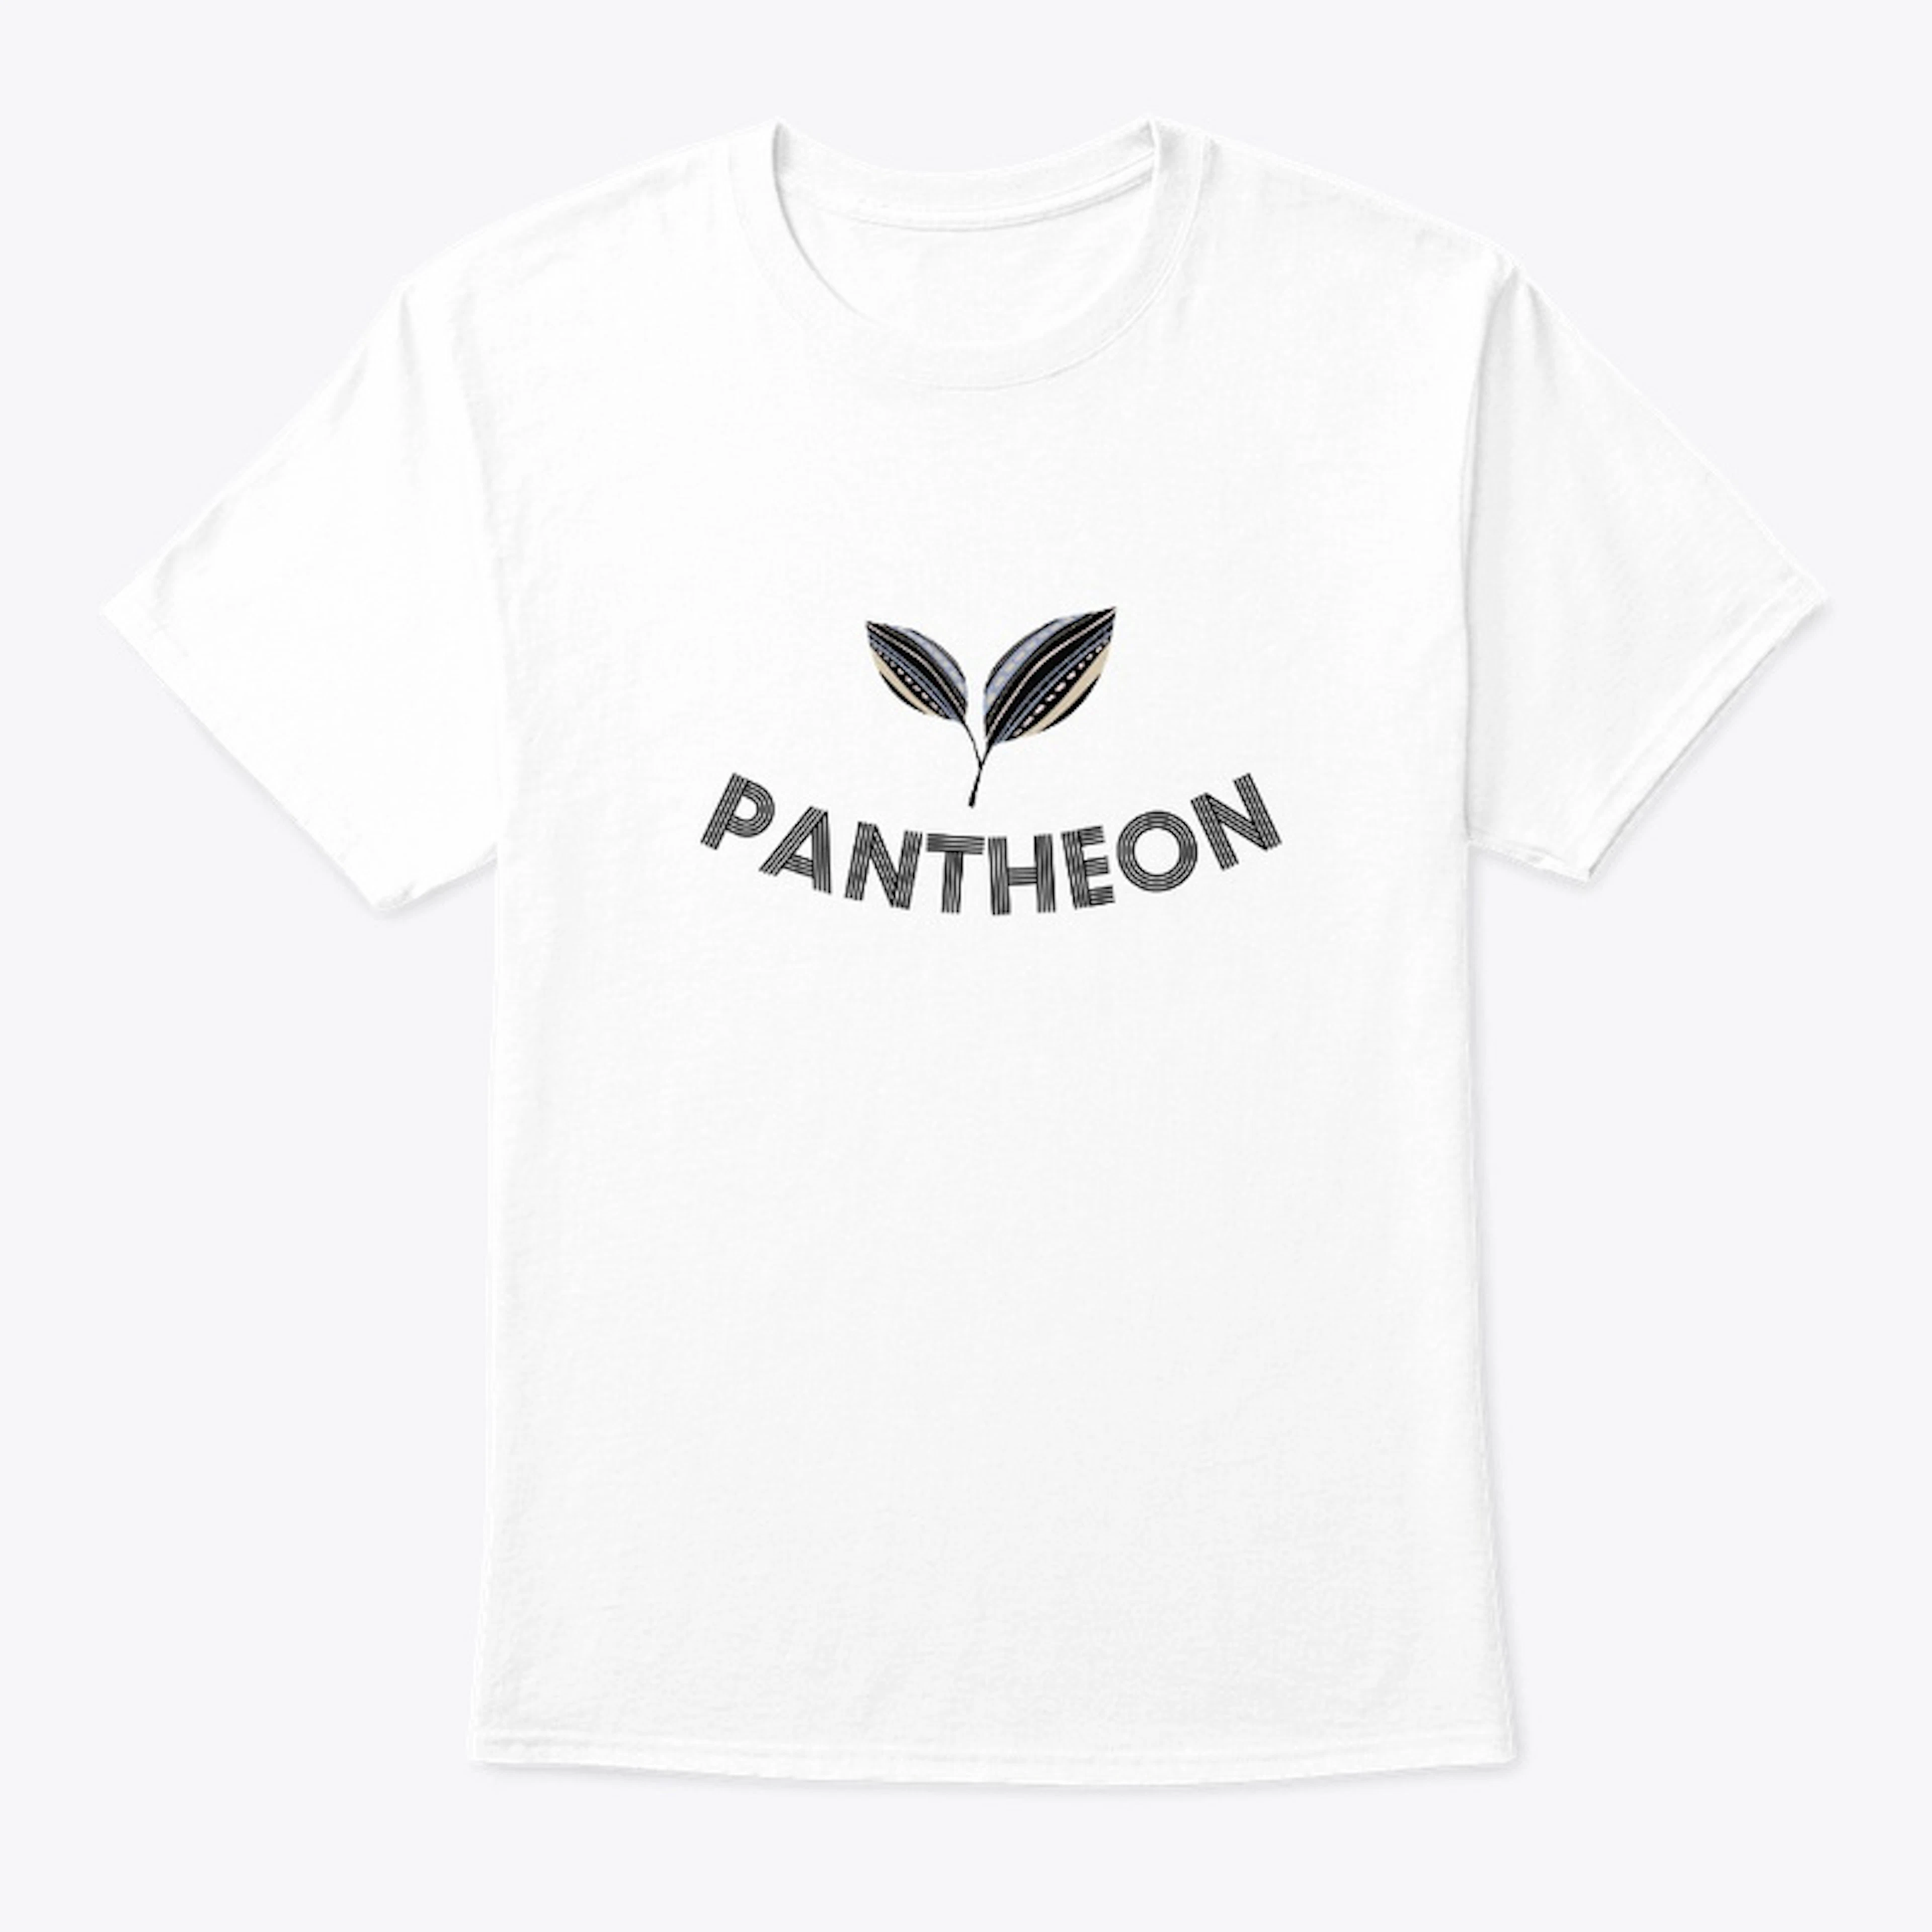 The CKH Pantheon Special Edition Apparel